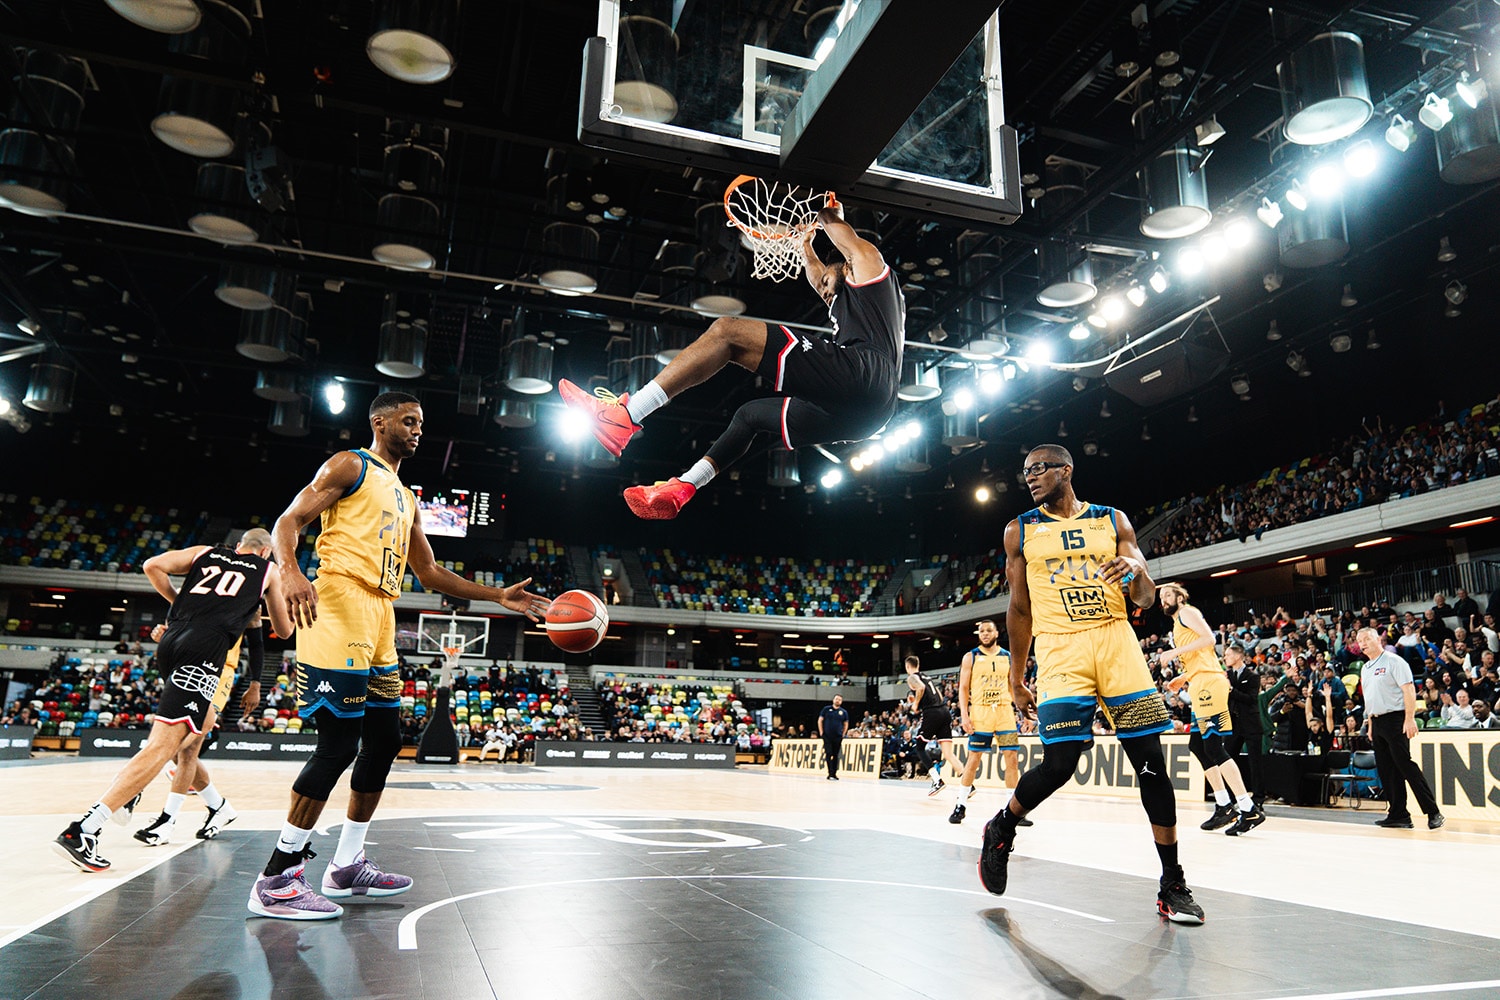 London Lions player hangs on rim after big dunking during a game